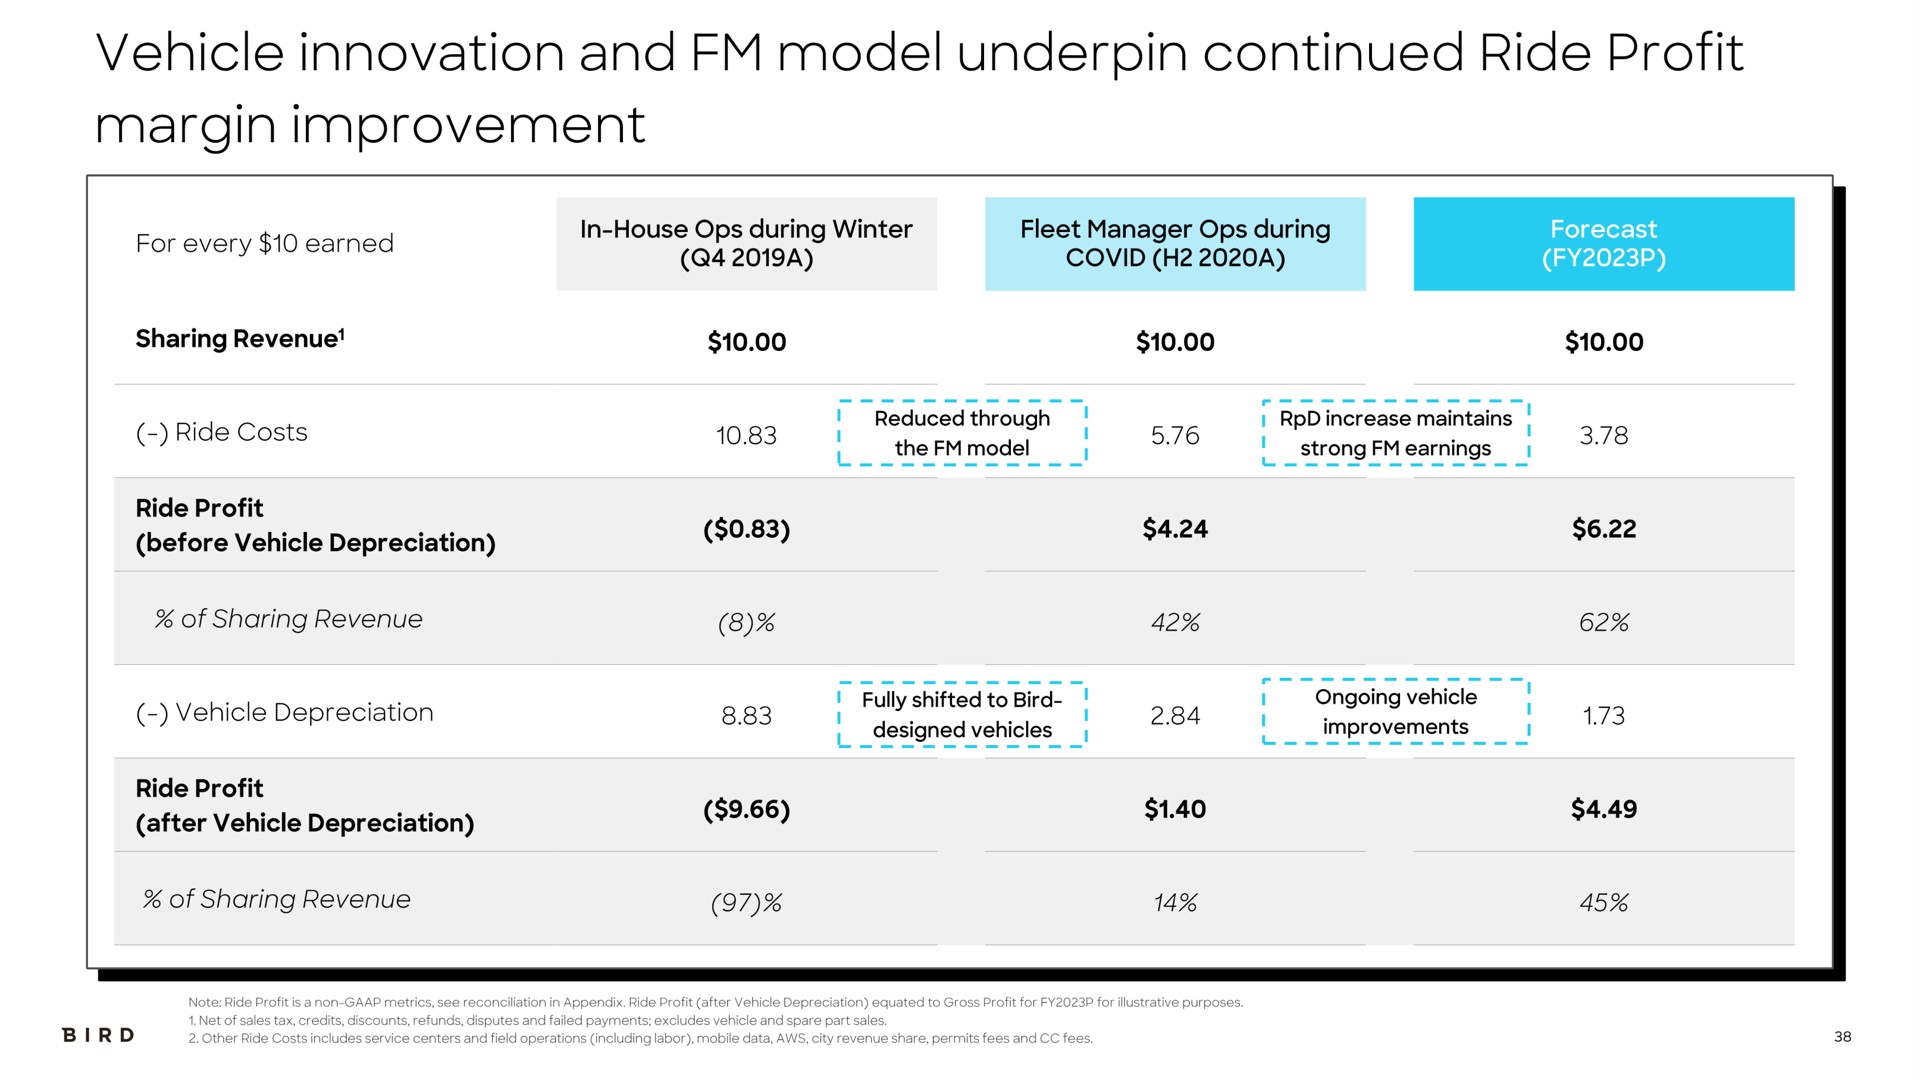 vehicle innovation and model underpin continued ride profit margin improvement | Bird